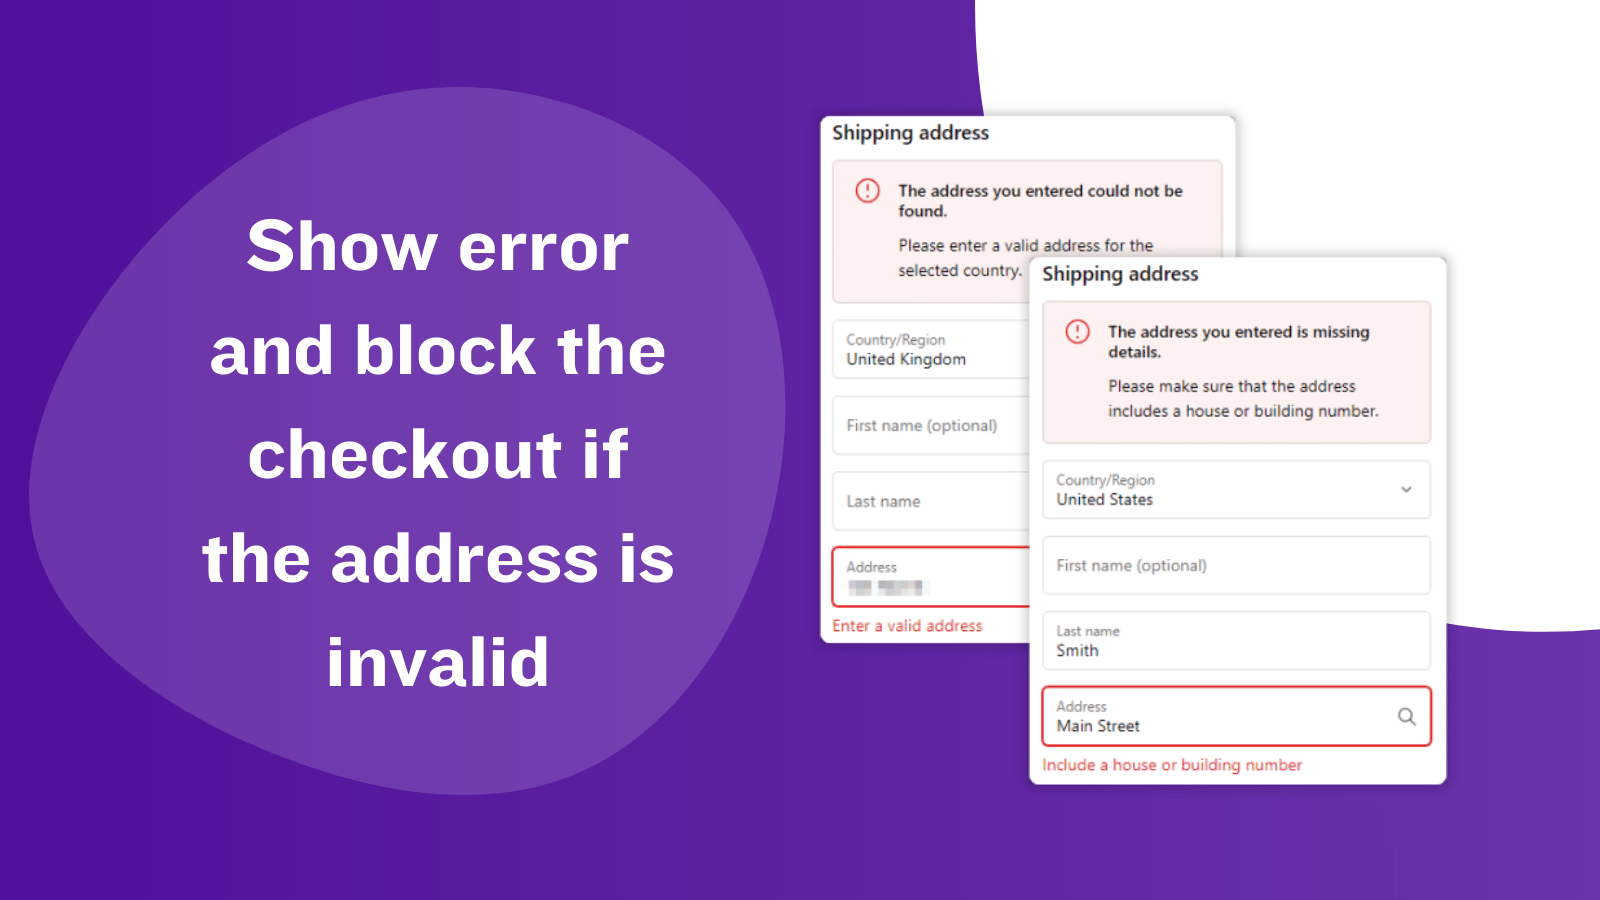 Show error and block the checkout if the address is invalid